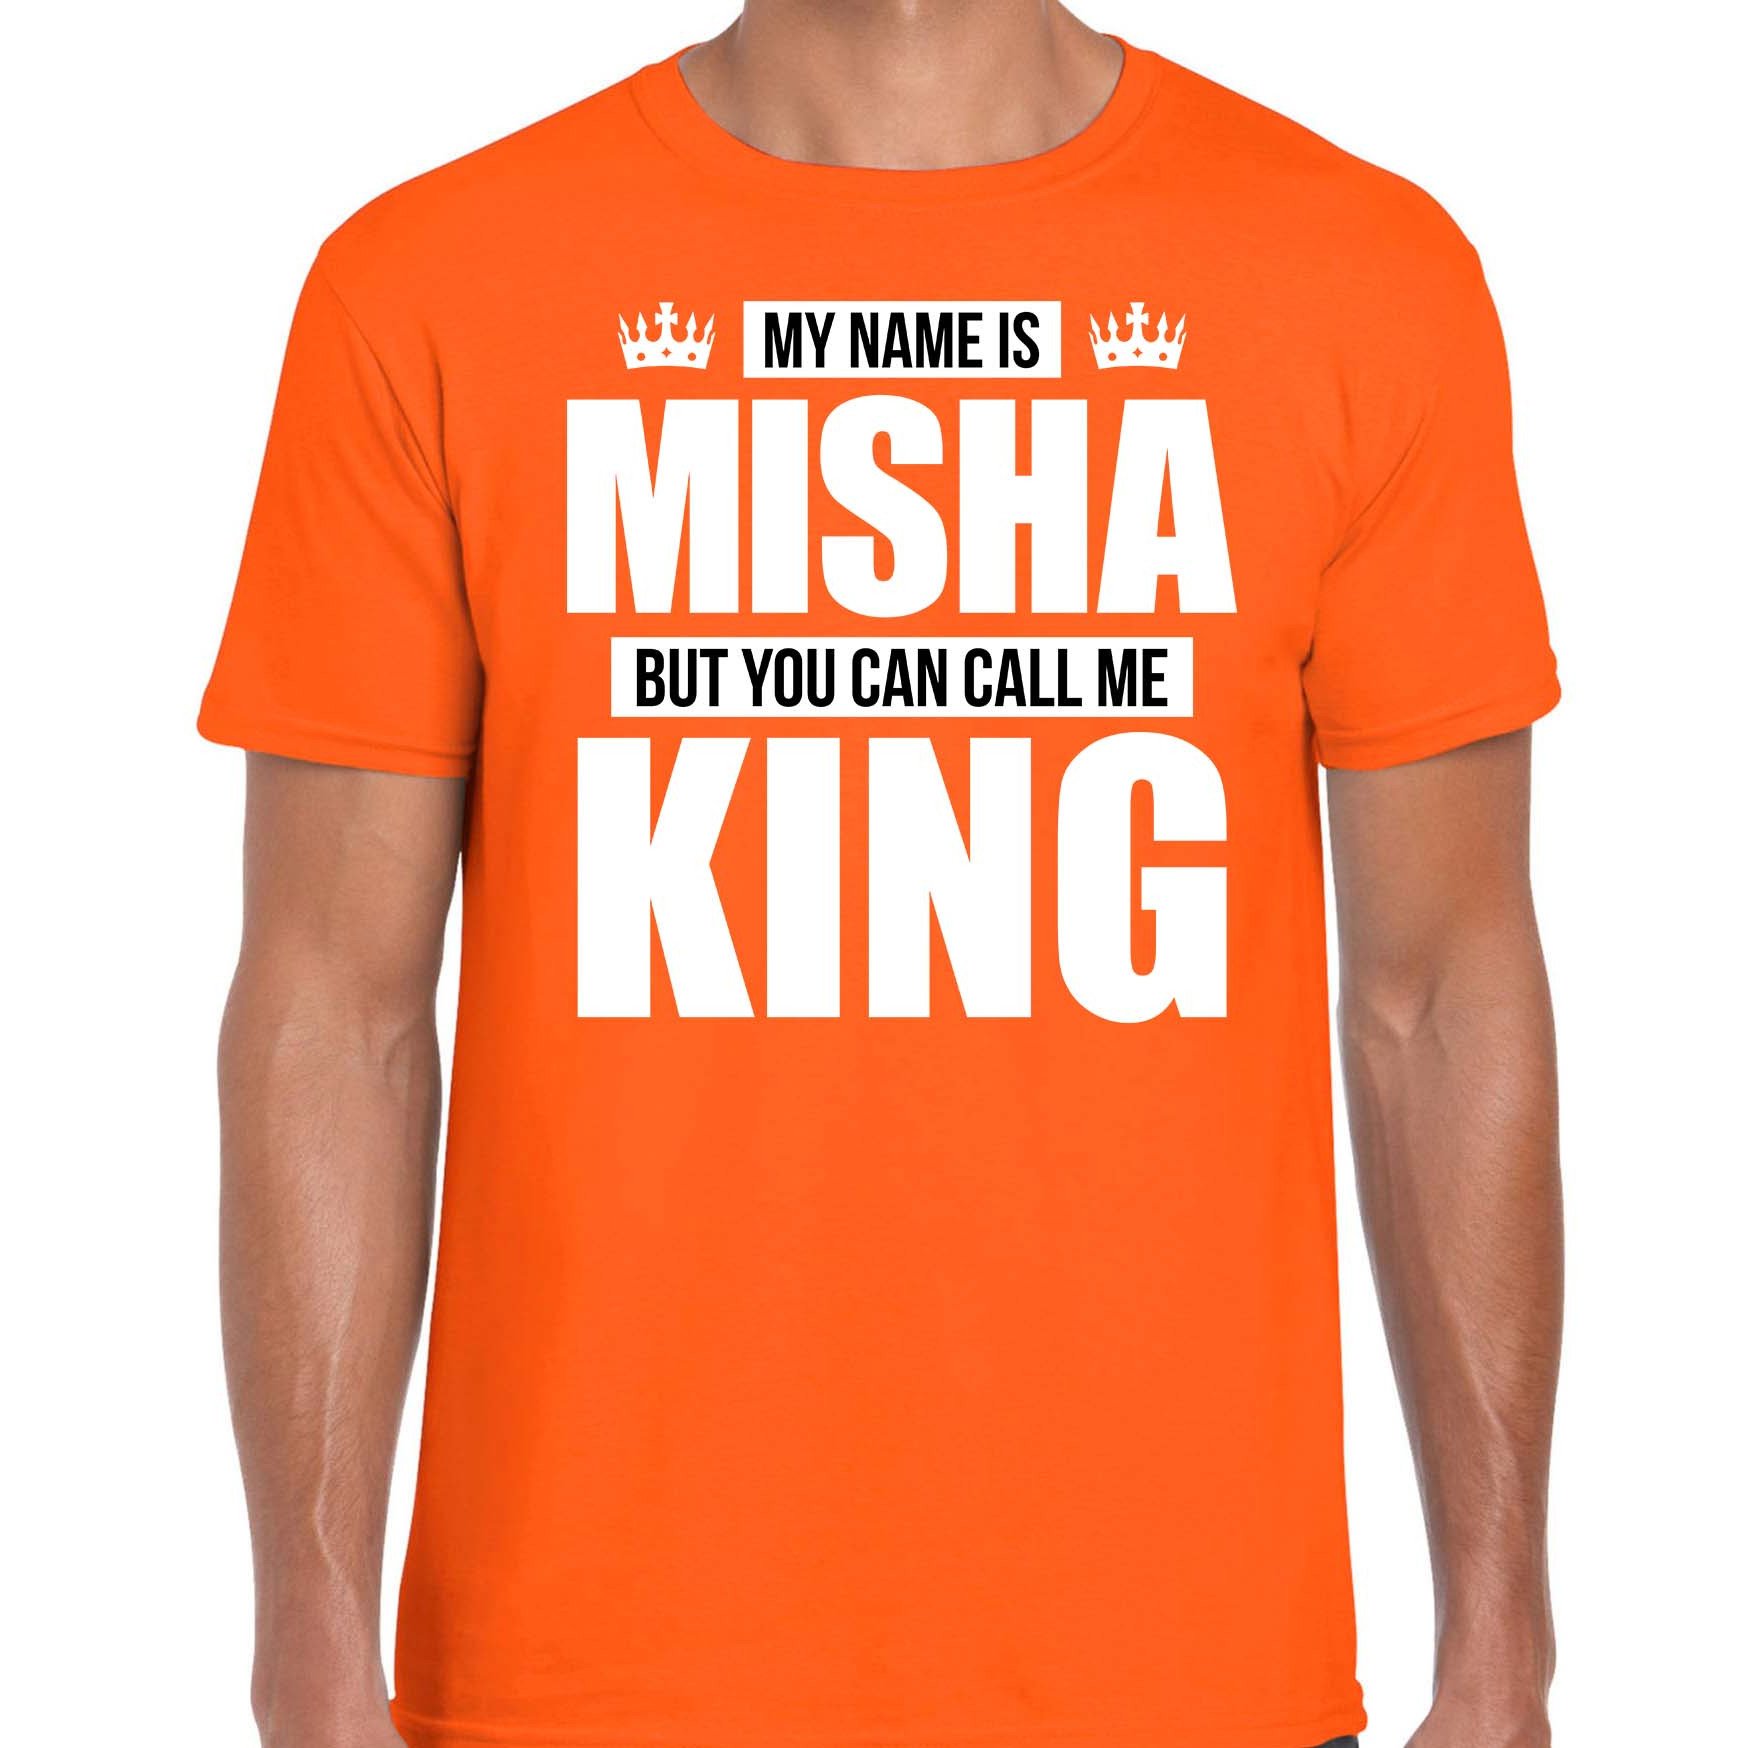 Naam cadeau t-shirt my name is Misha but you can call me King oranje voor heren